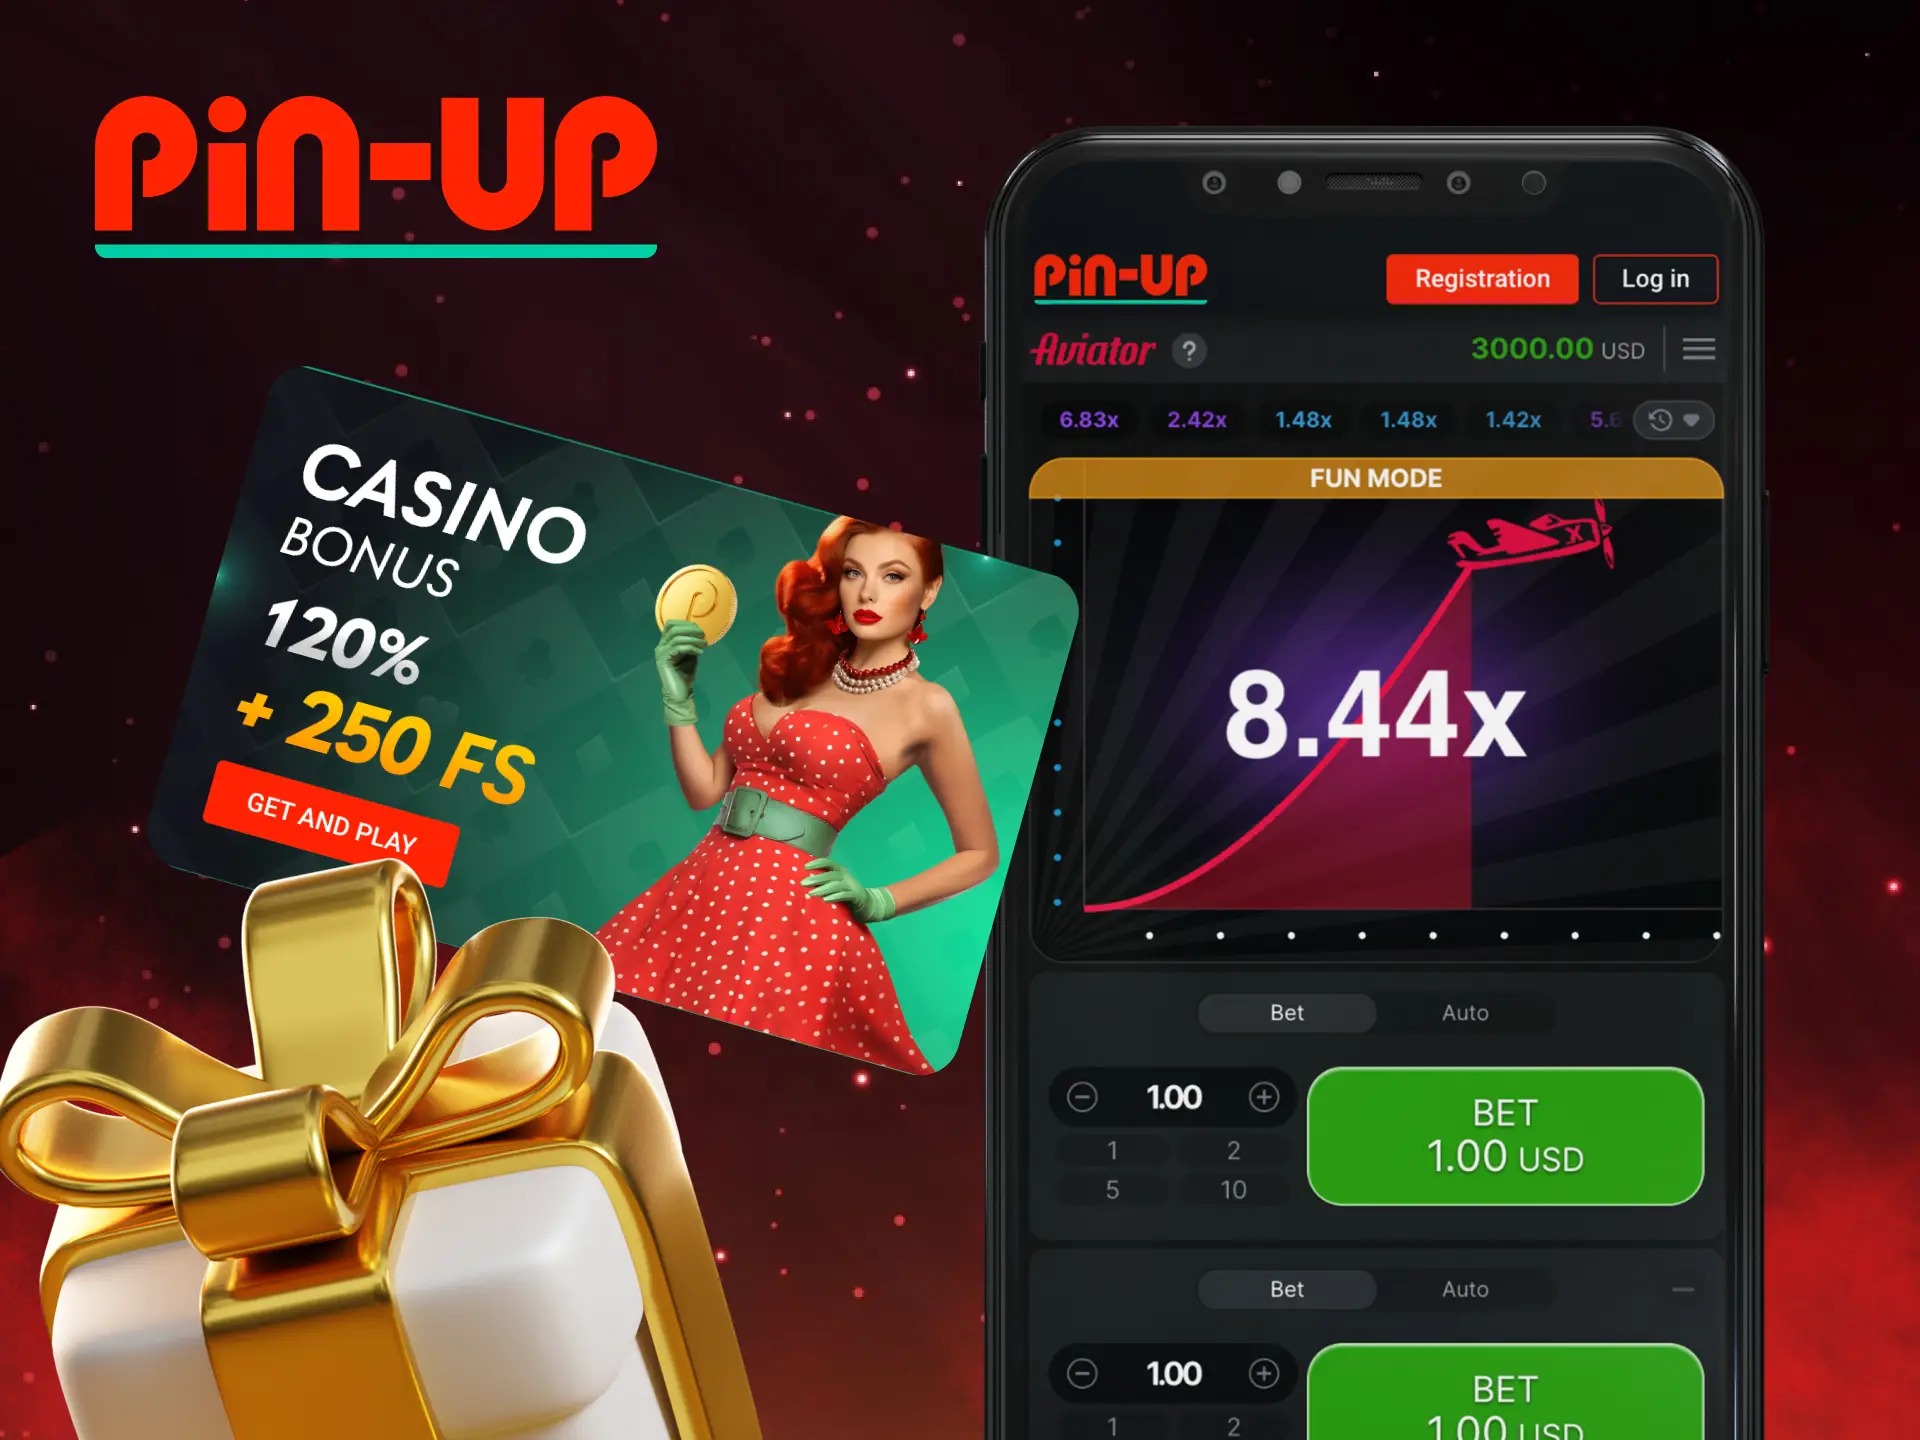 What are the advantages of playing Aviator on your phone in an online Pin-up casino.